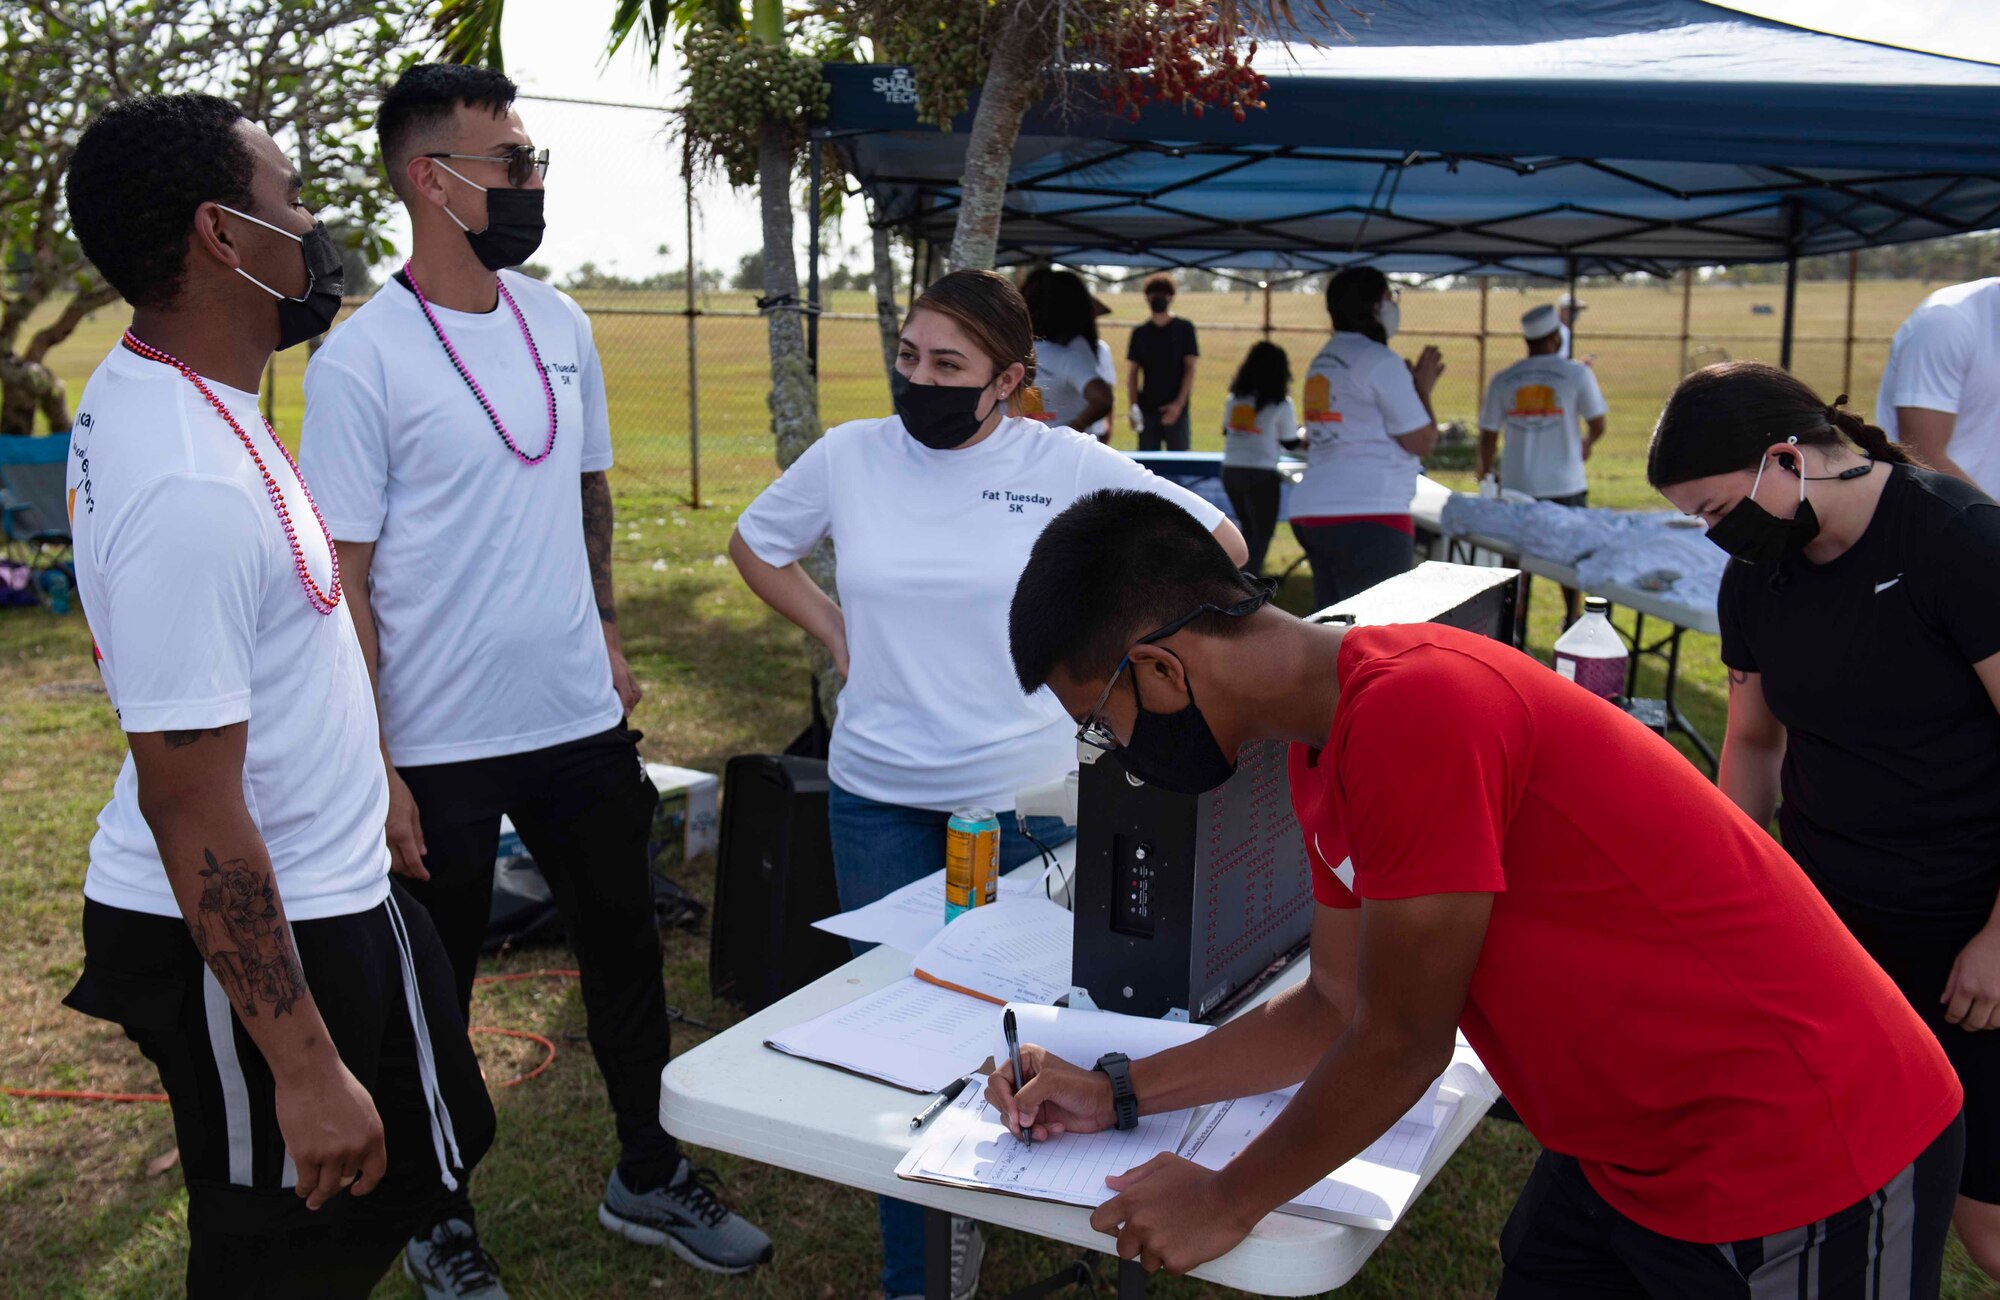 Volunteers help sign people in for the first ever Fat Tuesday 5K fun run at Andersen Air Force Base, Guam, Feb. 16, 2021.